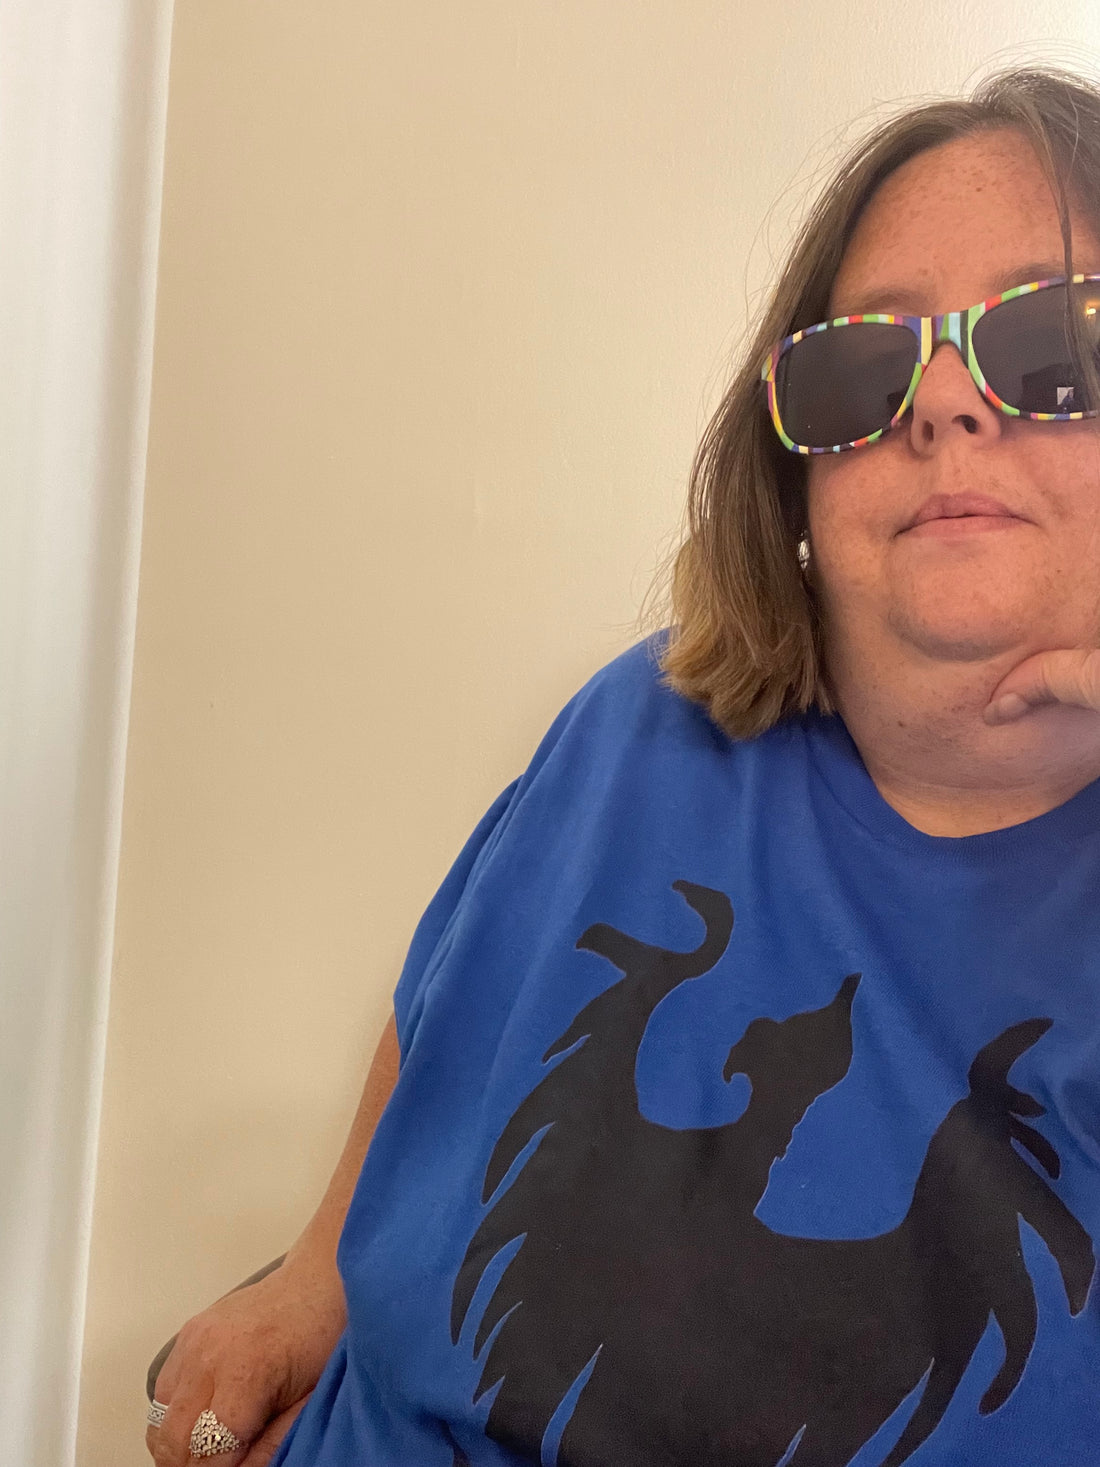 Tee Public Phoenix Rising Plus Size Tshirt Unboxing and Review